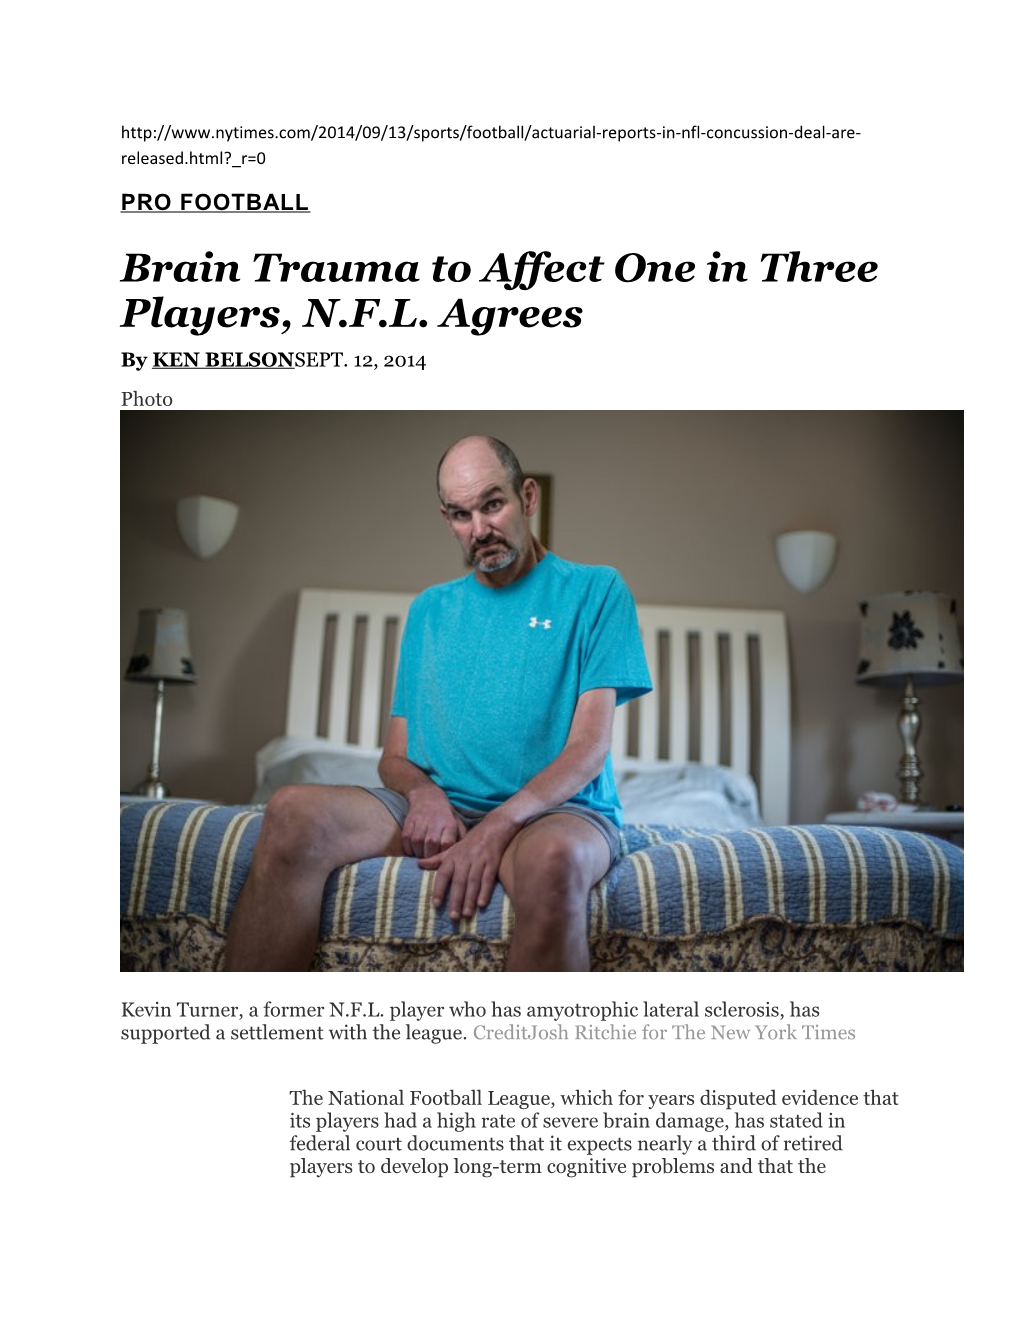 Brain Trauma to Affect One in Three Players, N.F.L. Agrees